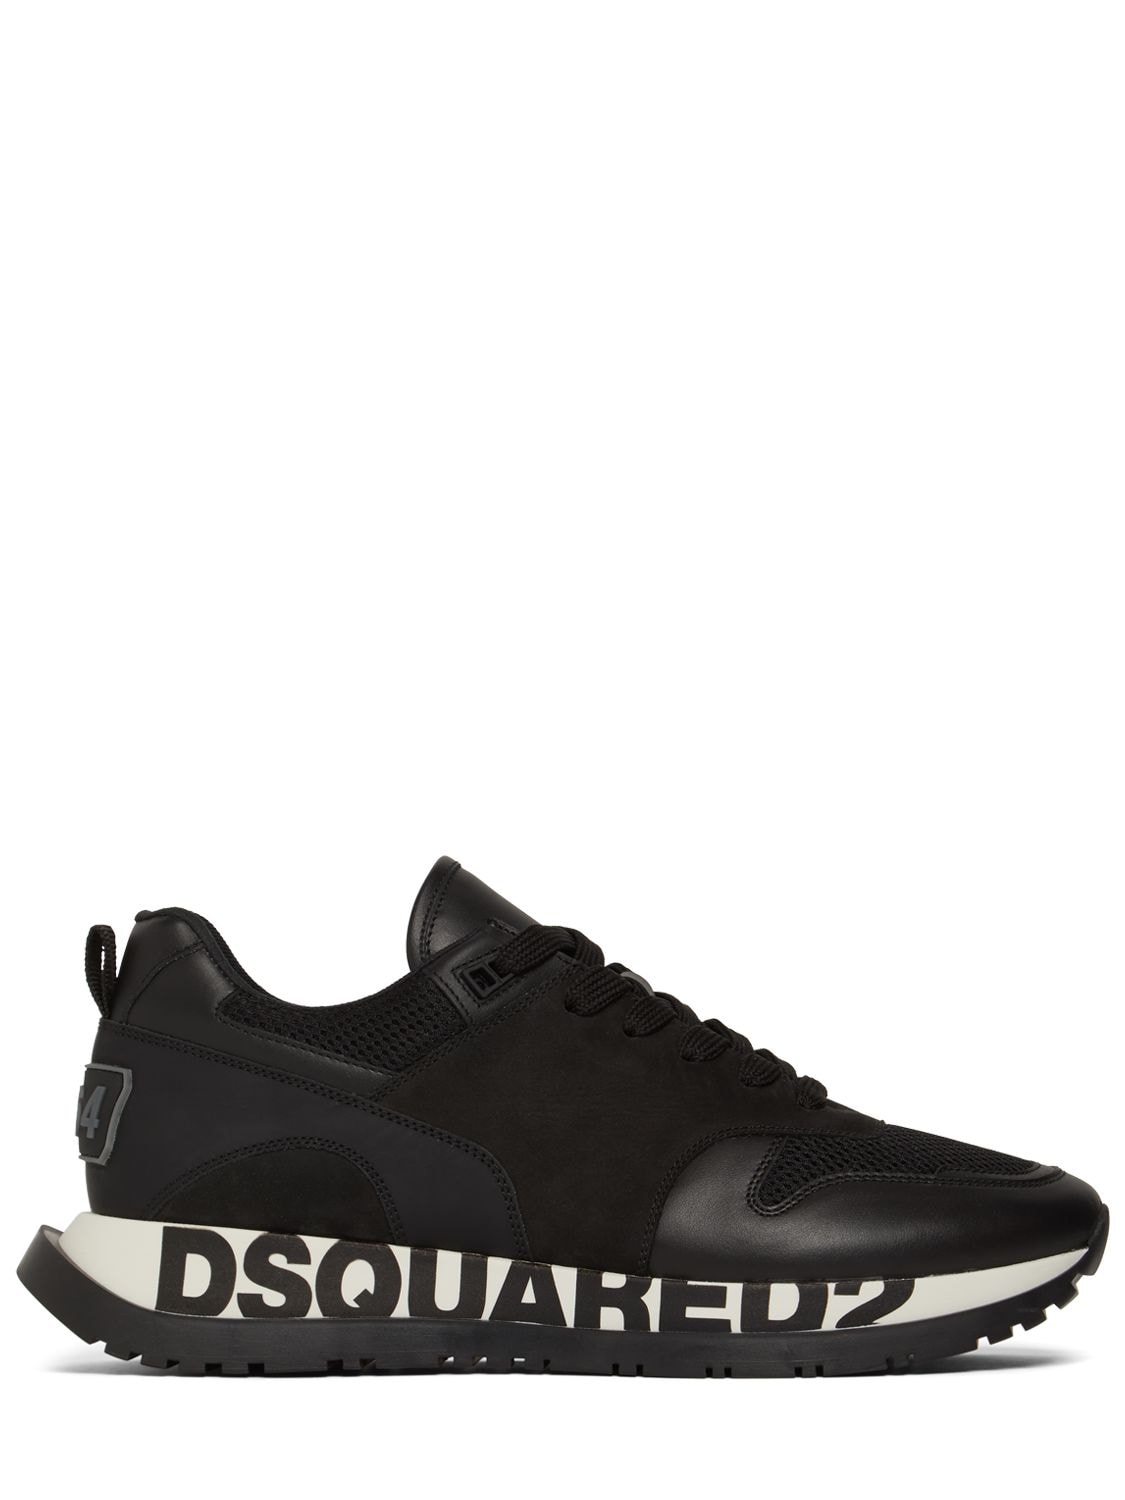 DSQUARED2 Logo Runner Leather & Mesh Sneakers